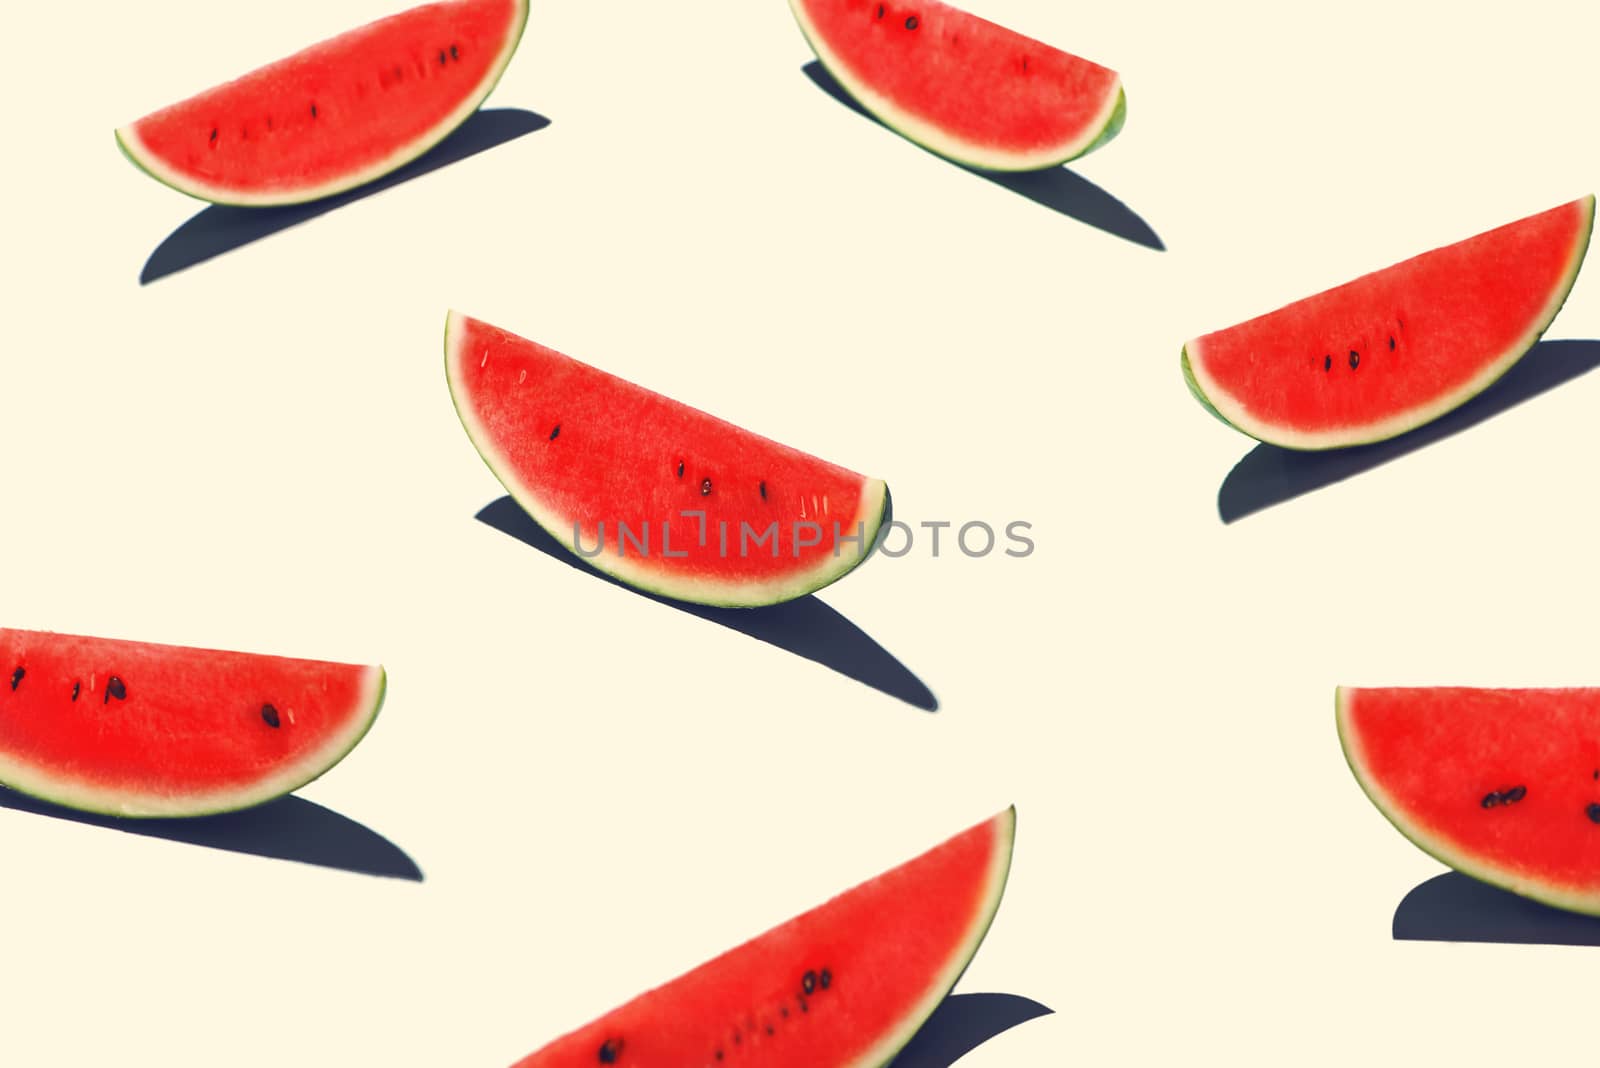 Sliced ripe watermelon isolated on white background by makidotvn